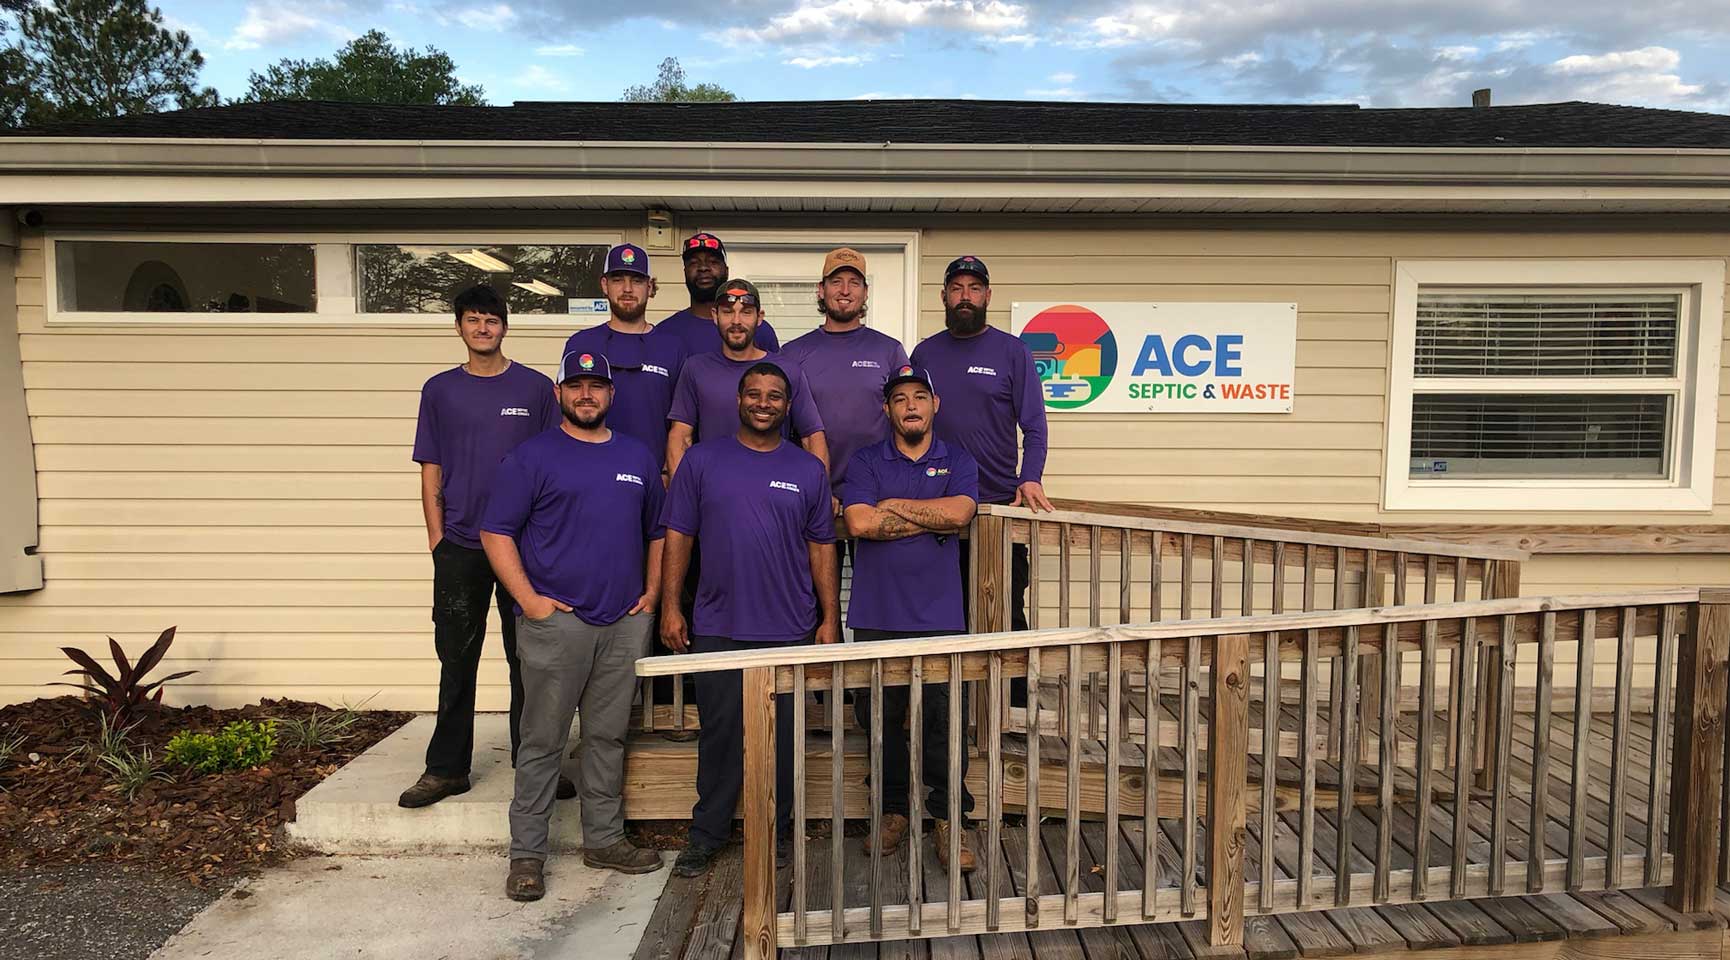 Photo of 9 people in purple shirts in front of a small office building with the ACE Septic & Waste sign on it.